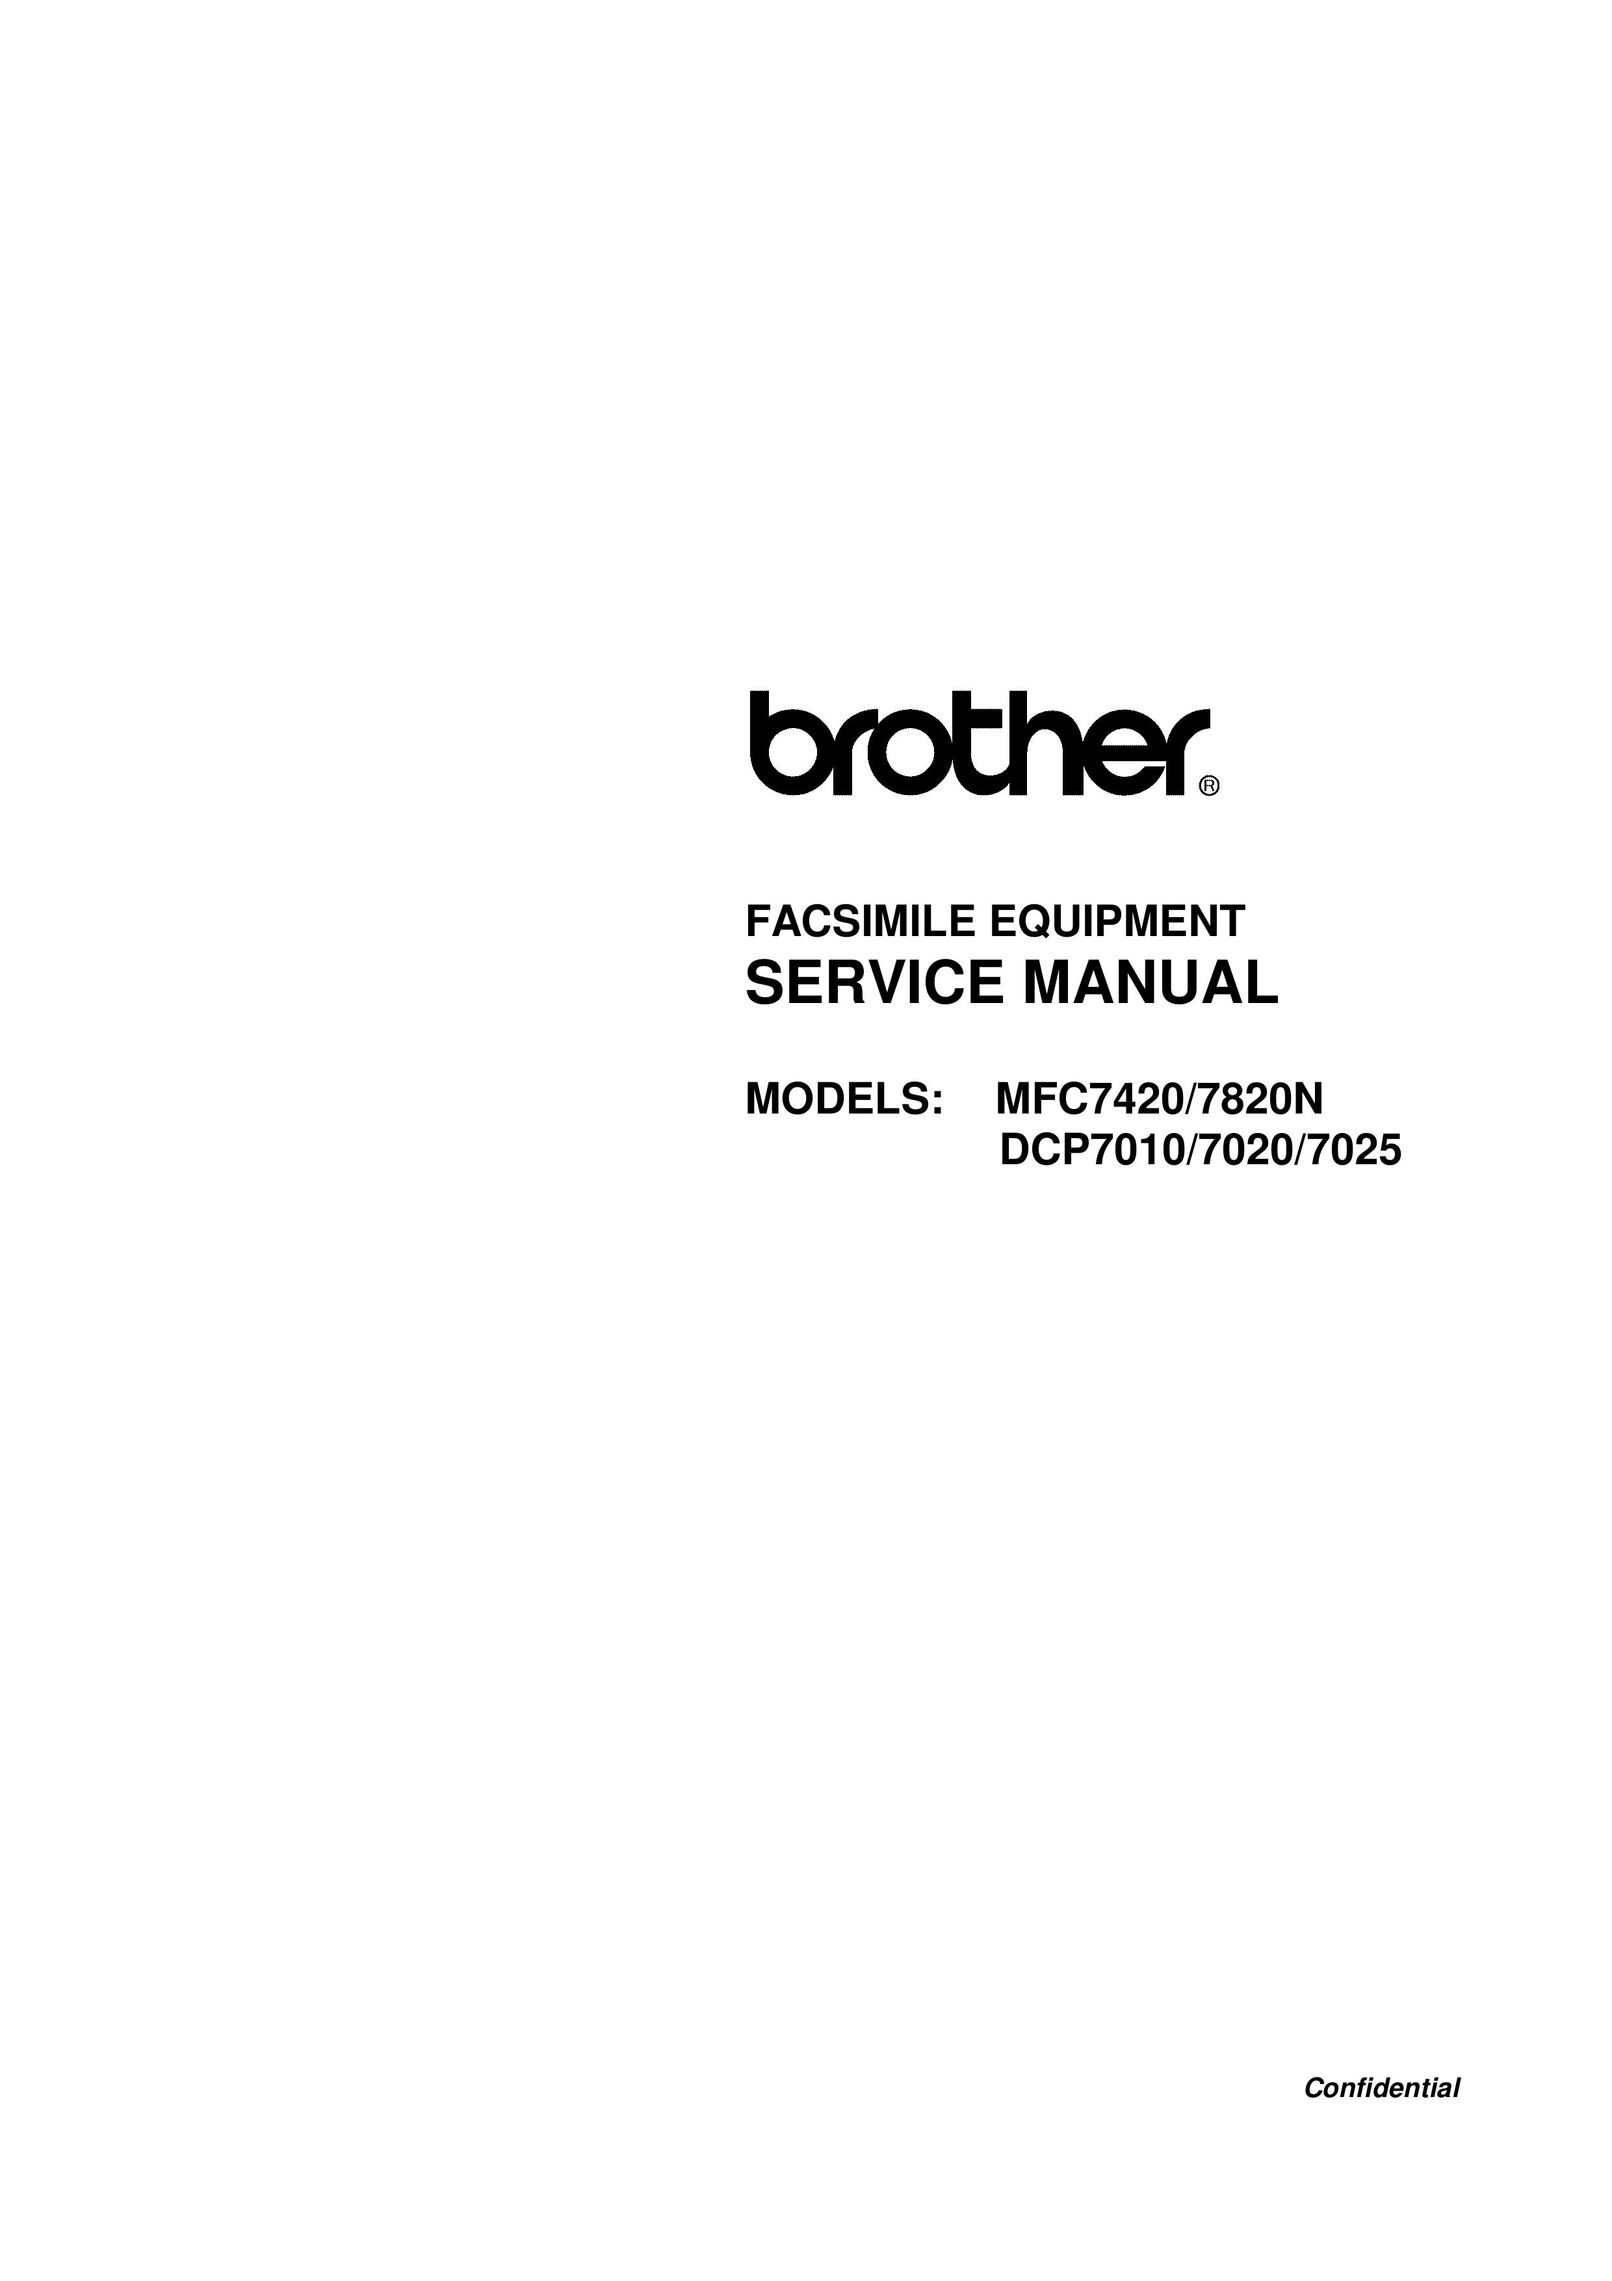 Brother DCP7010 Fax Machine User Manual